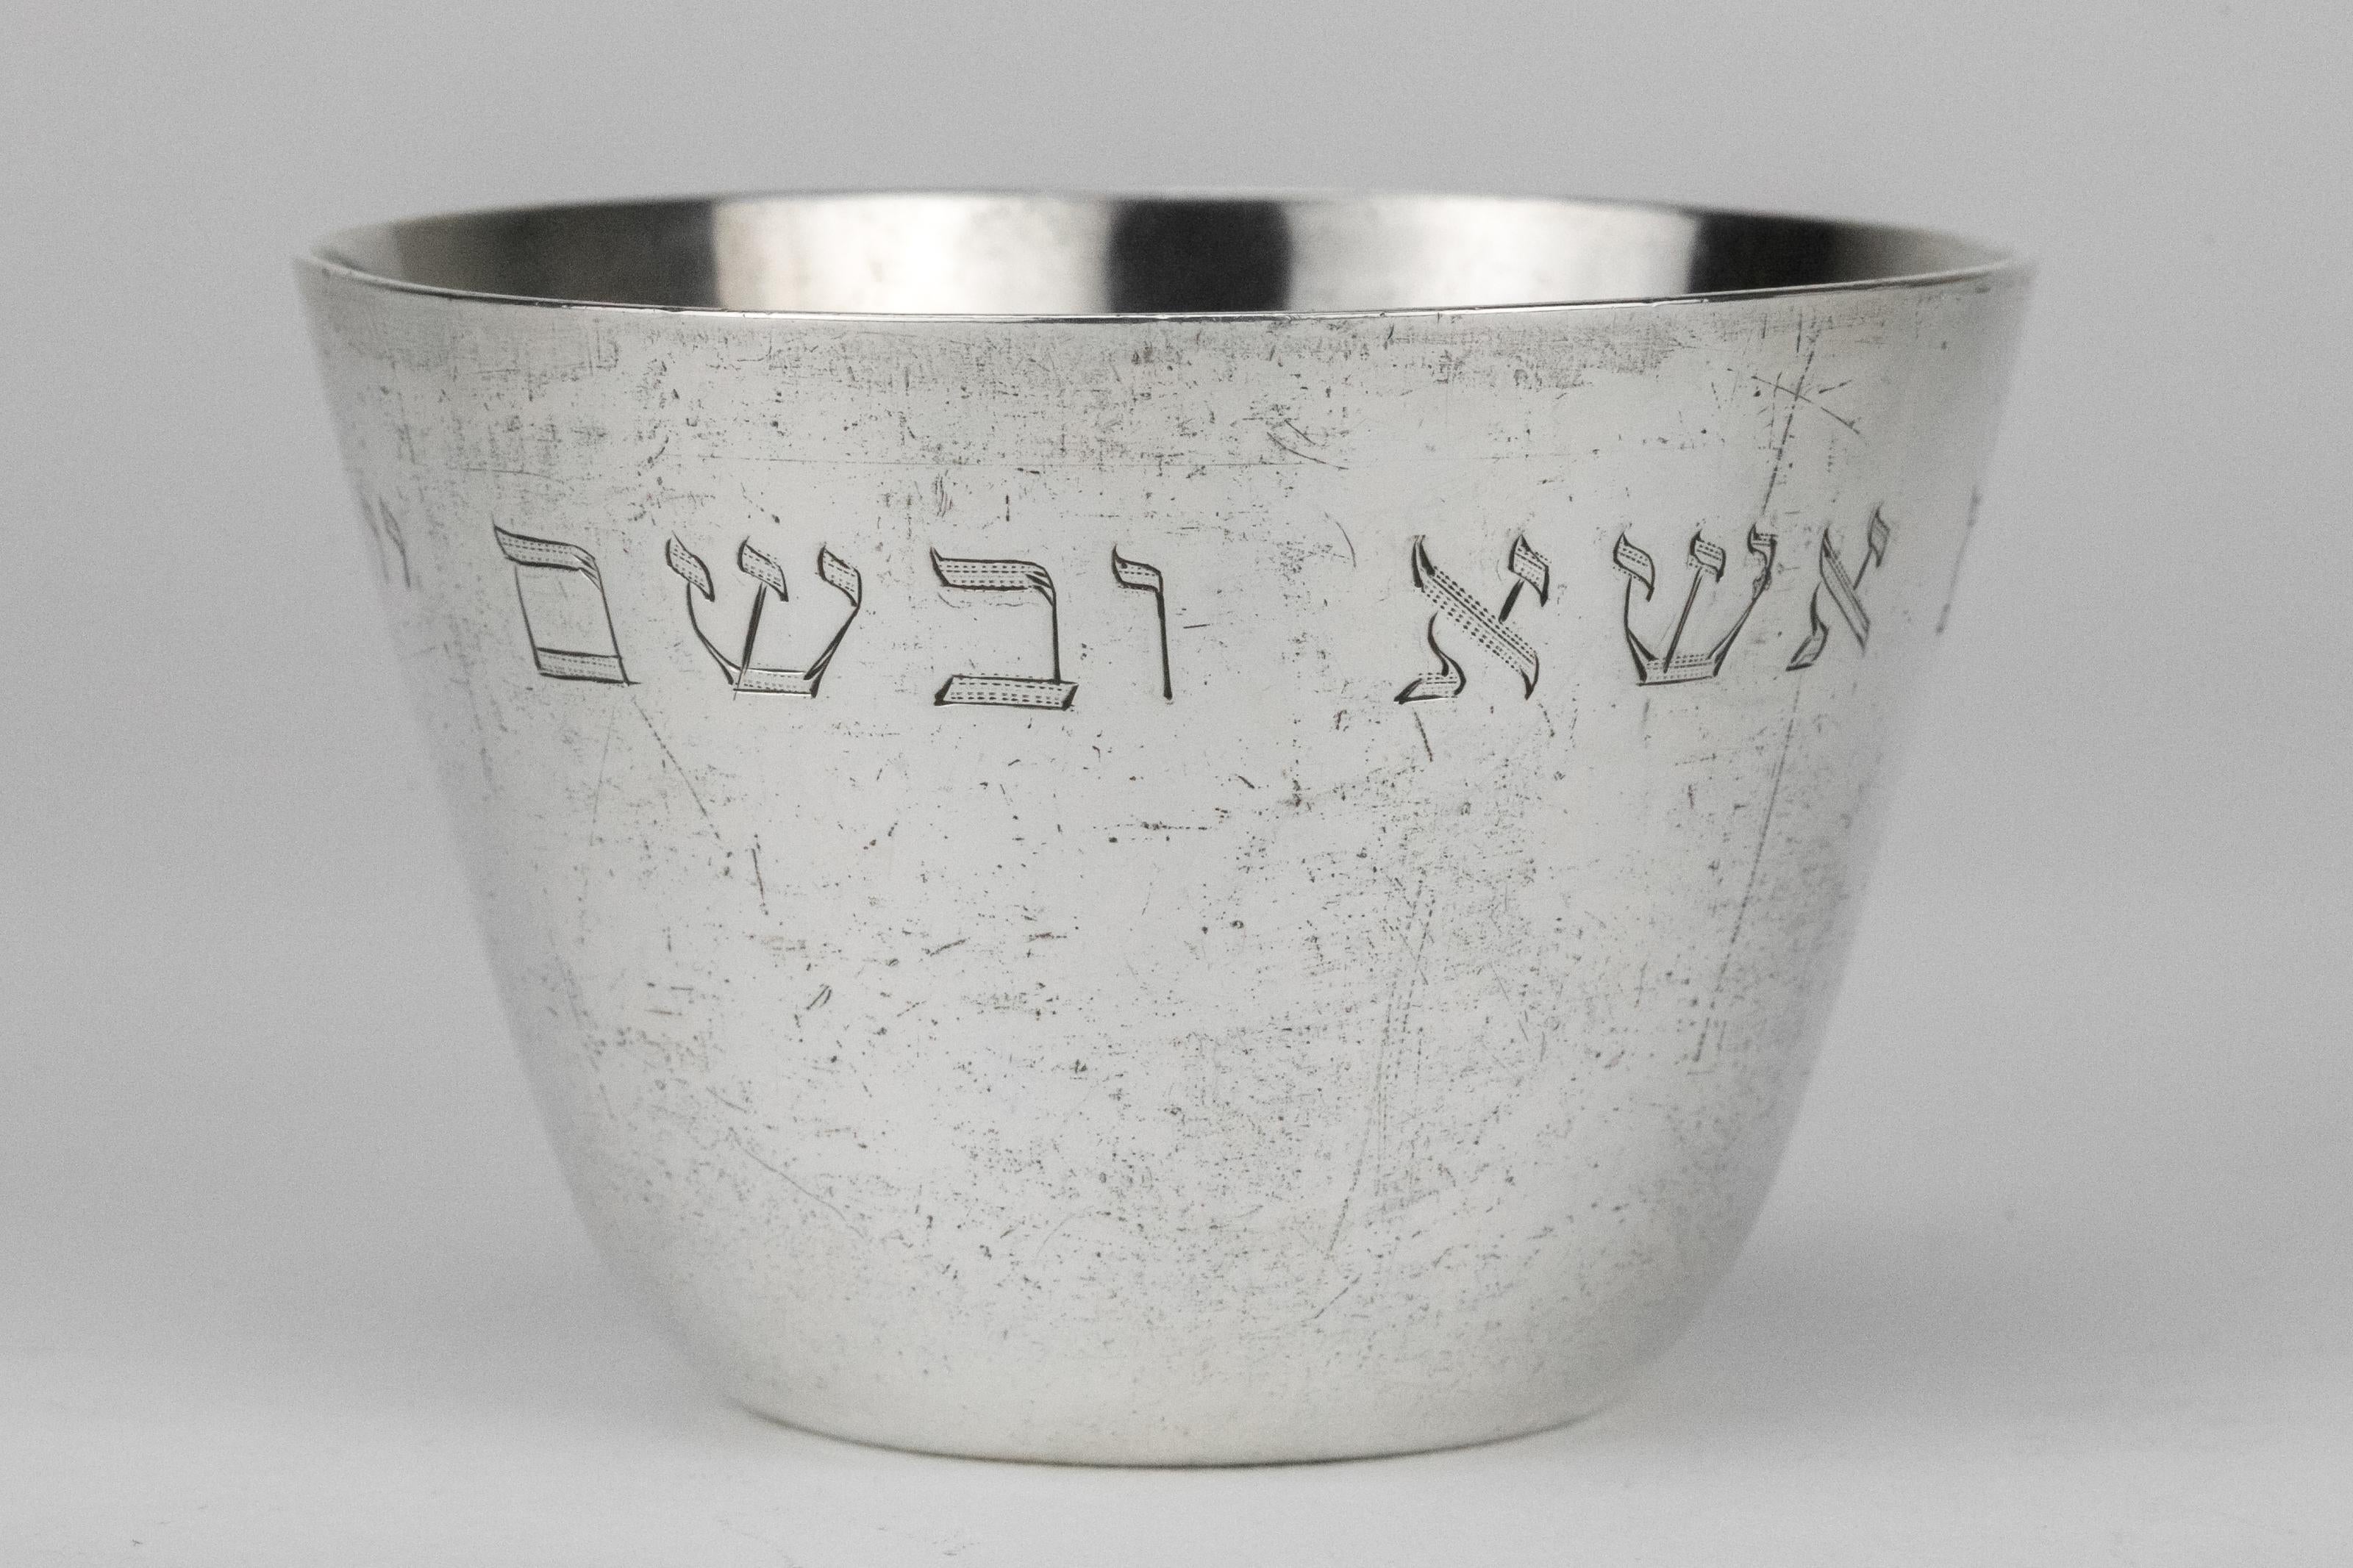 Engraved in Hebrew “I will raise the cup of deliverance, and I shall invoke the Name of G-d” (Psalms 116:13). To signify where the beginning and end of this verse is, an eight-pointed star was engraved. Underneath this in Latin letters is a